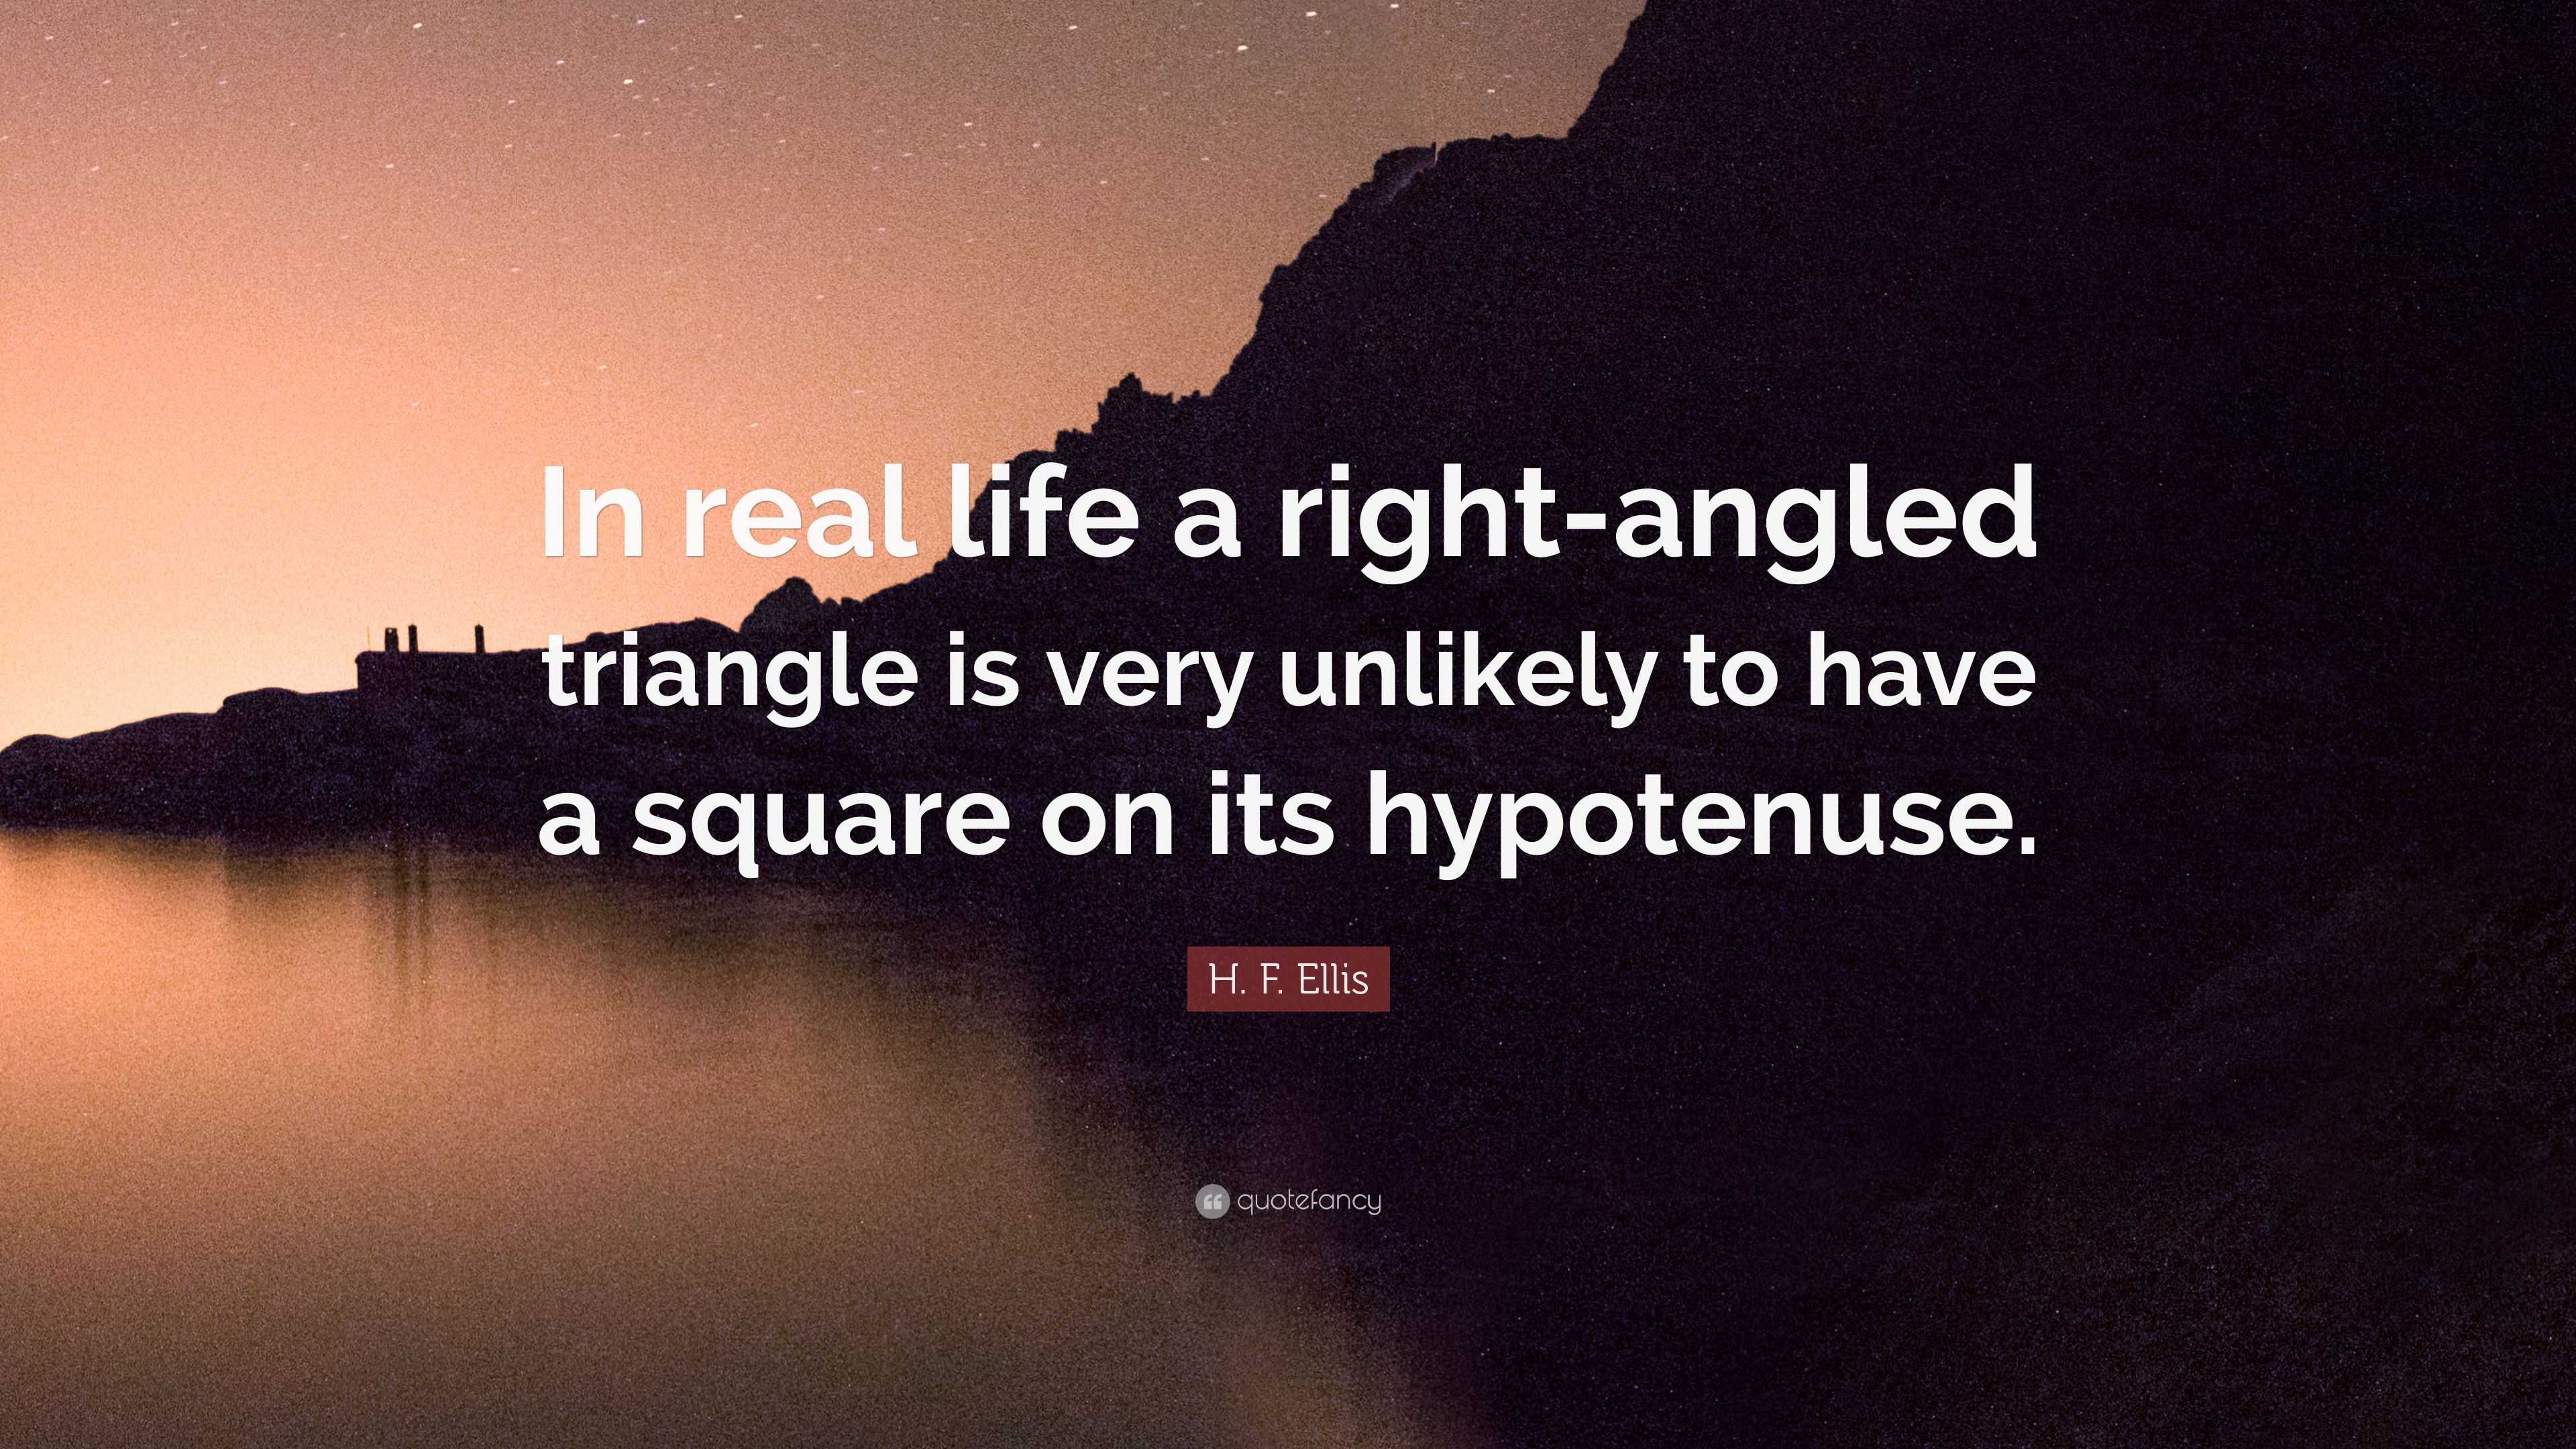 H F Ellis Quote “In real life a right angled triangle is very unlikely